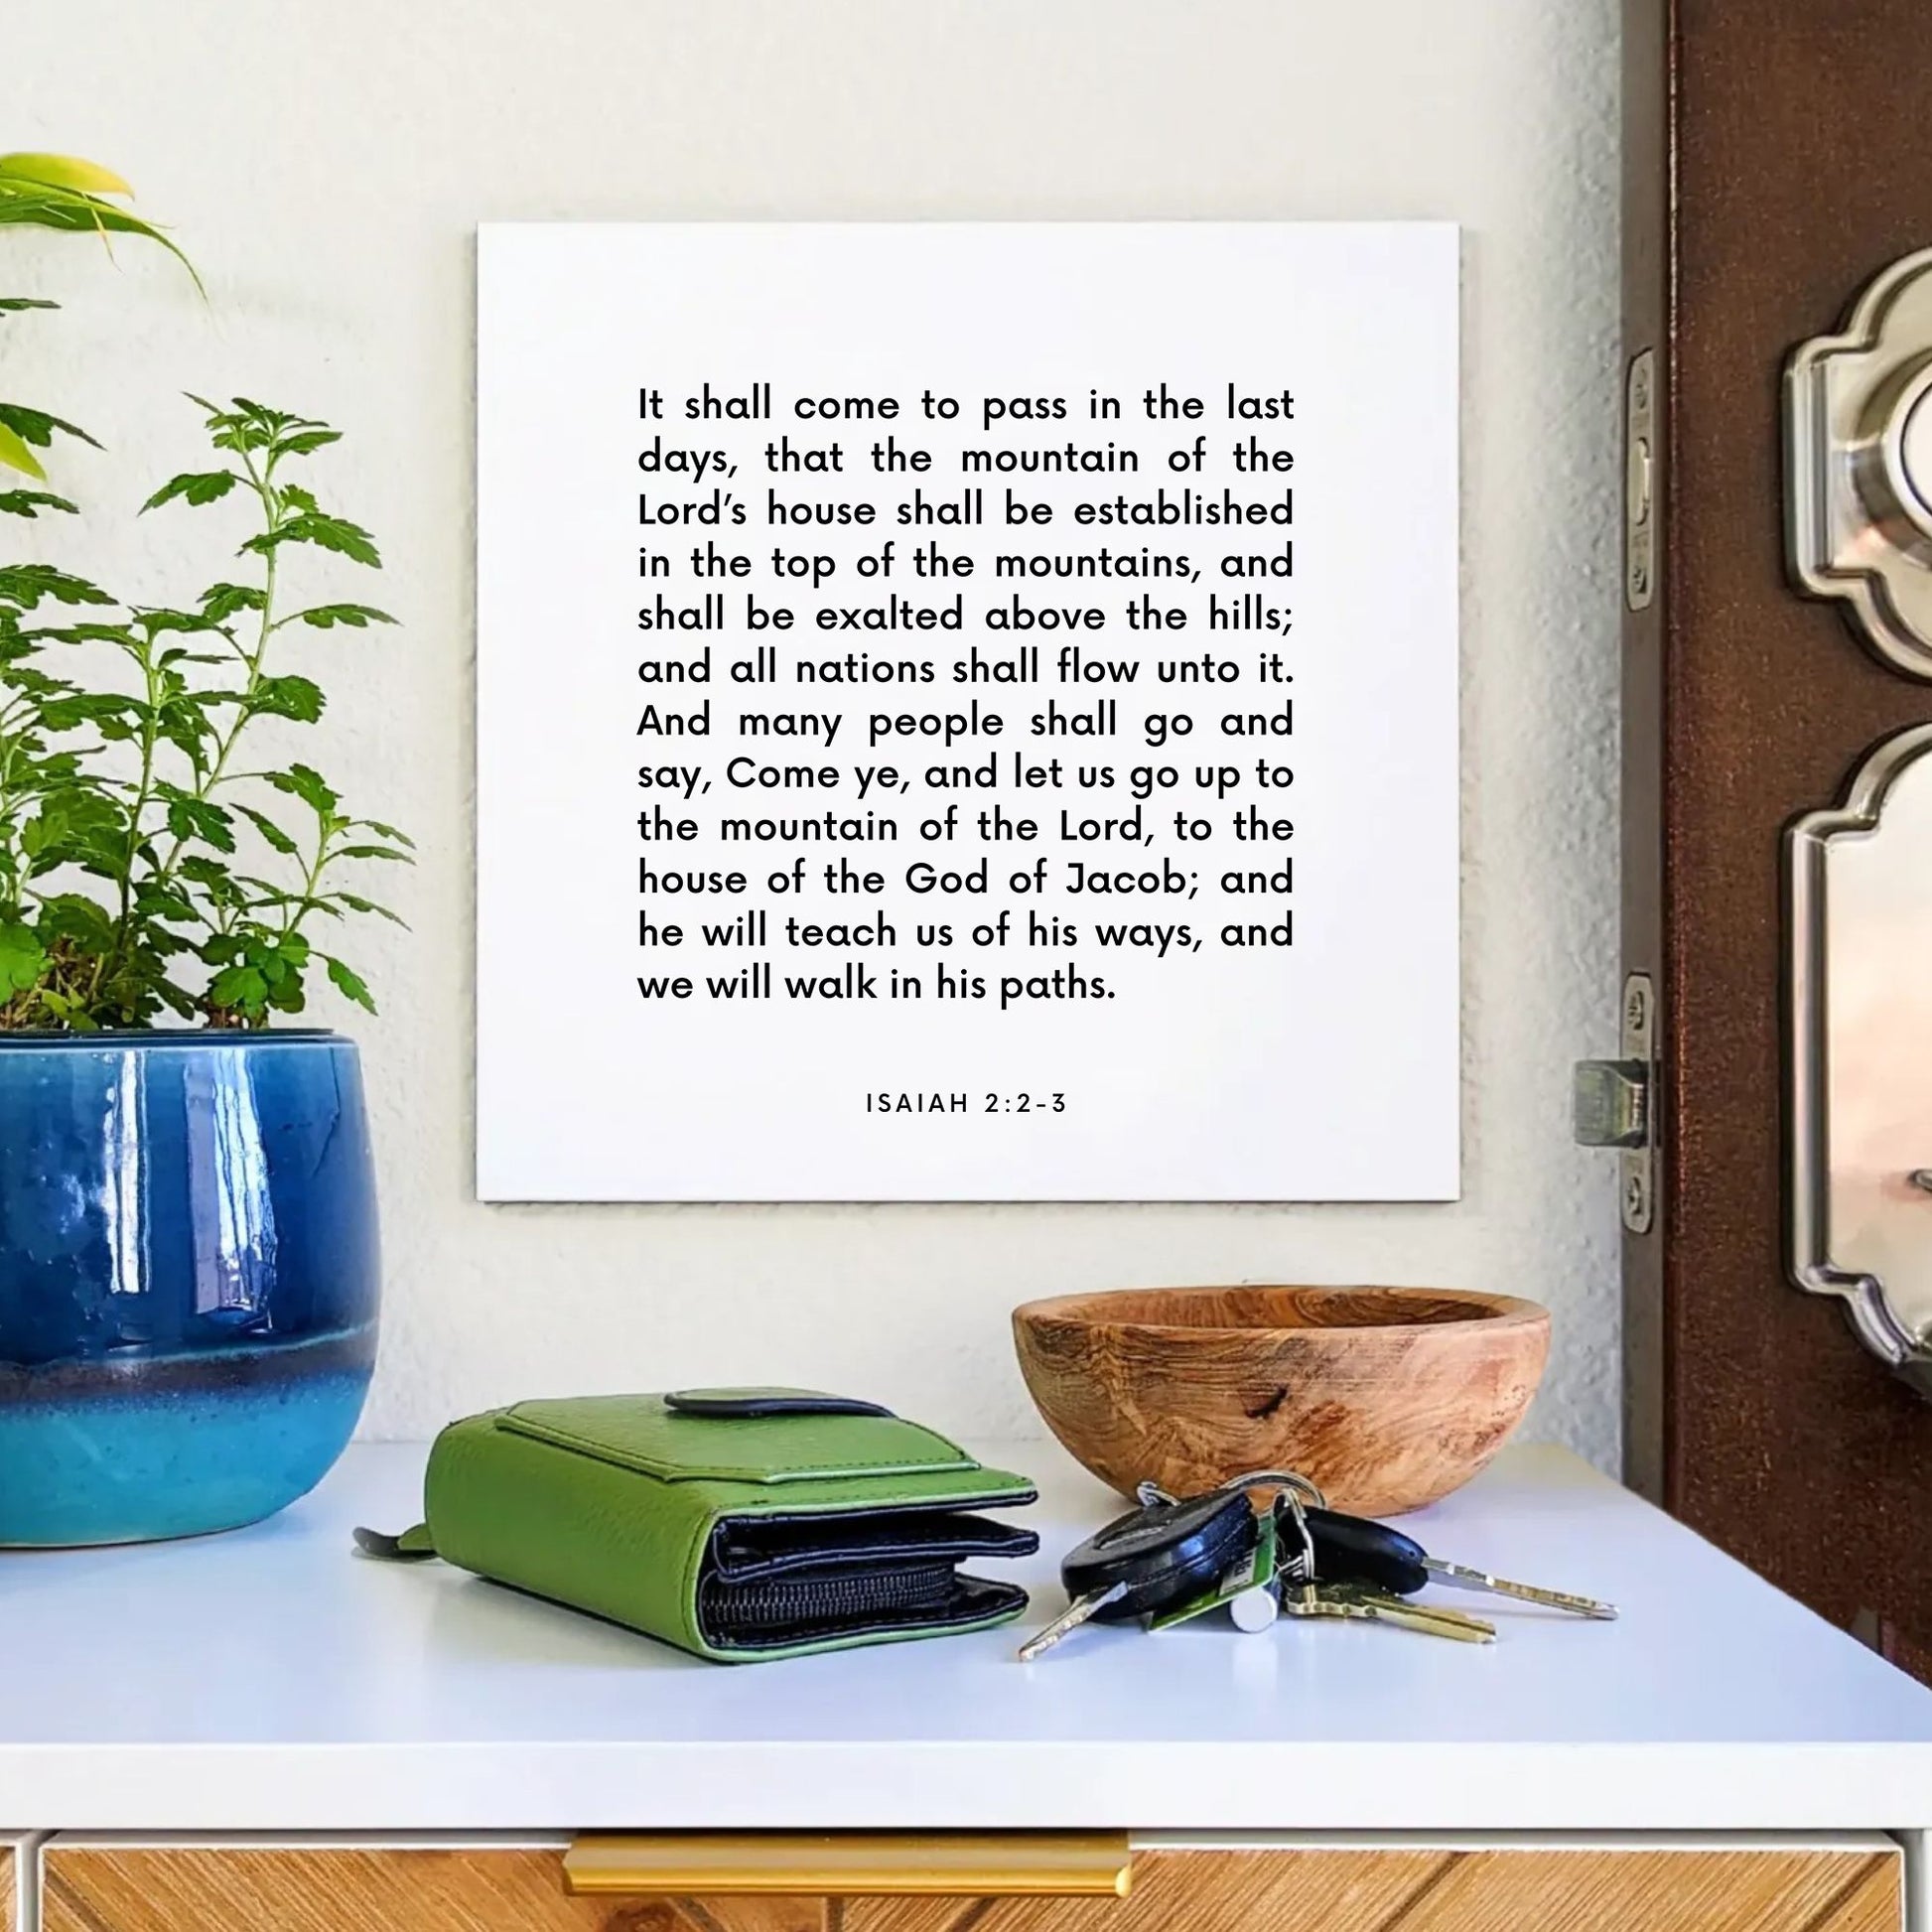 Entryway mouting of the scripture tile for Isaiah 2:2-3 - "He will teach us of his ways, and we will walk in his paths"